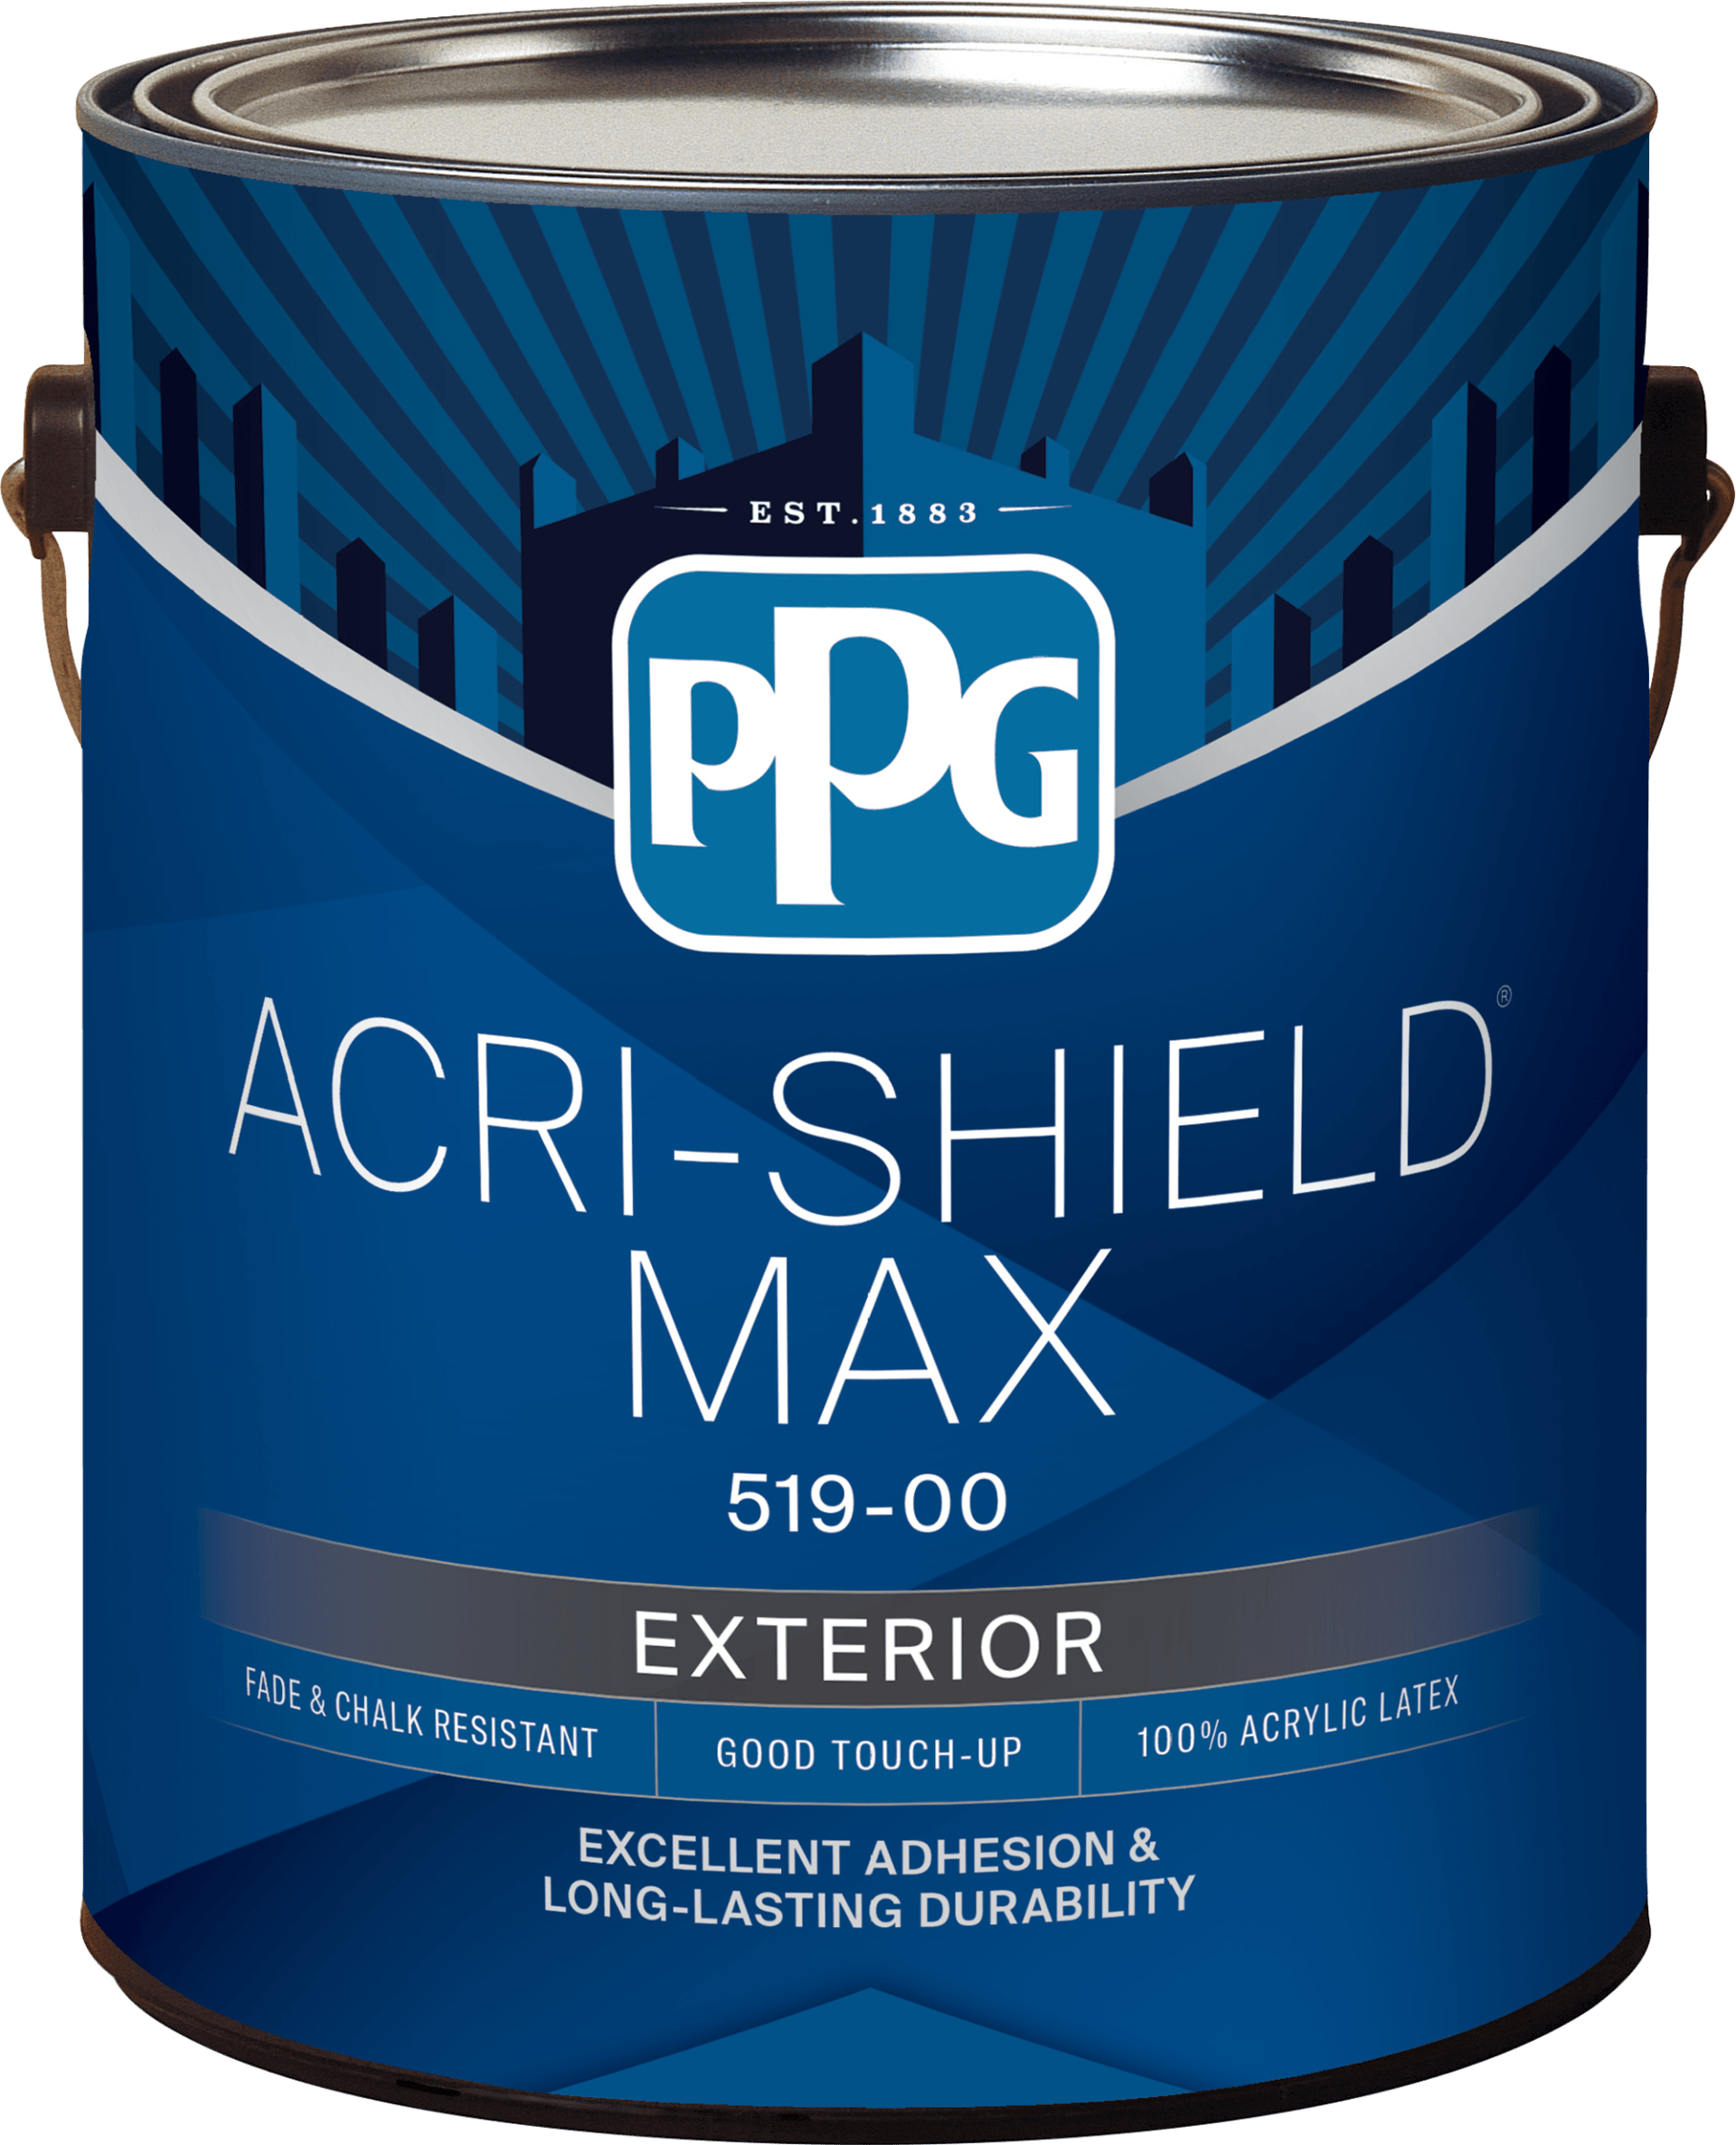 ACRI-SHIELD® MAX® exterior house paint from PPG at 21st Century Paints near Holland, Ohio (OH)